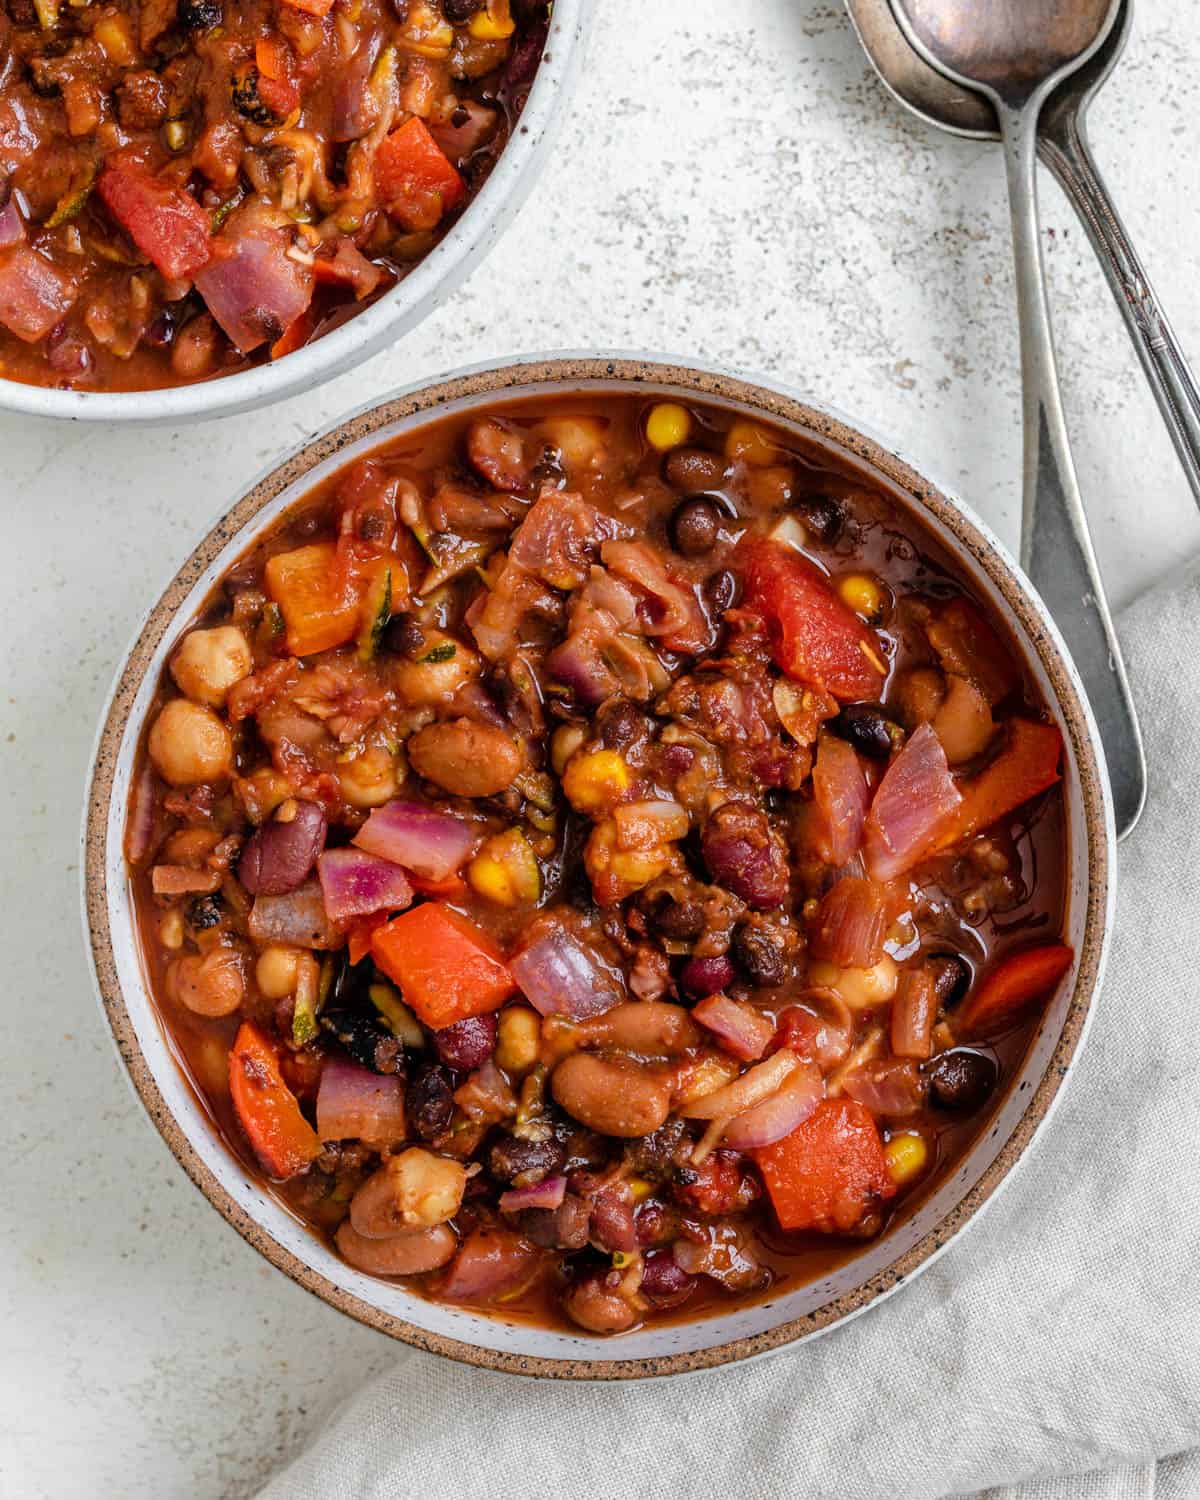 completed Vegan Bean Chili plated in a bowl against a light background